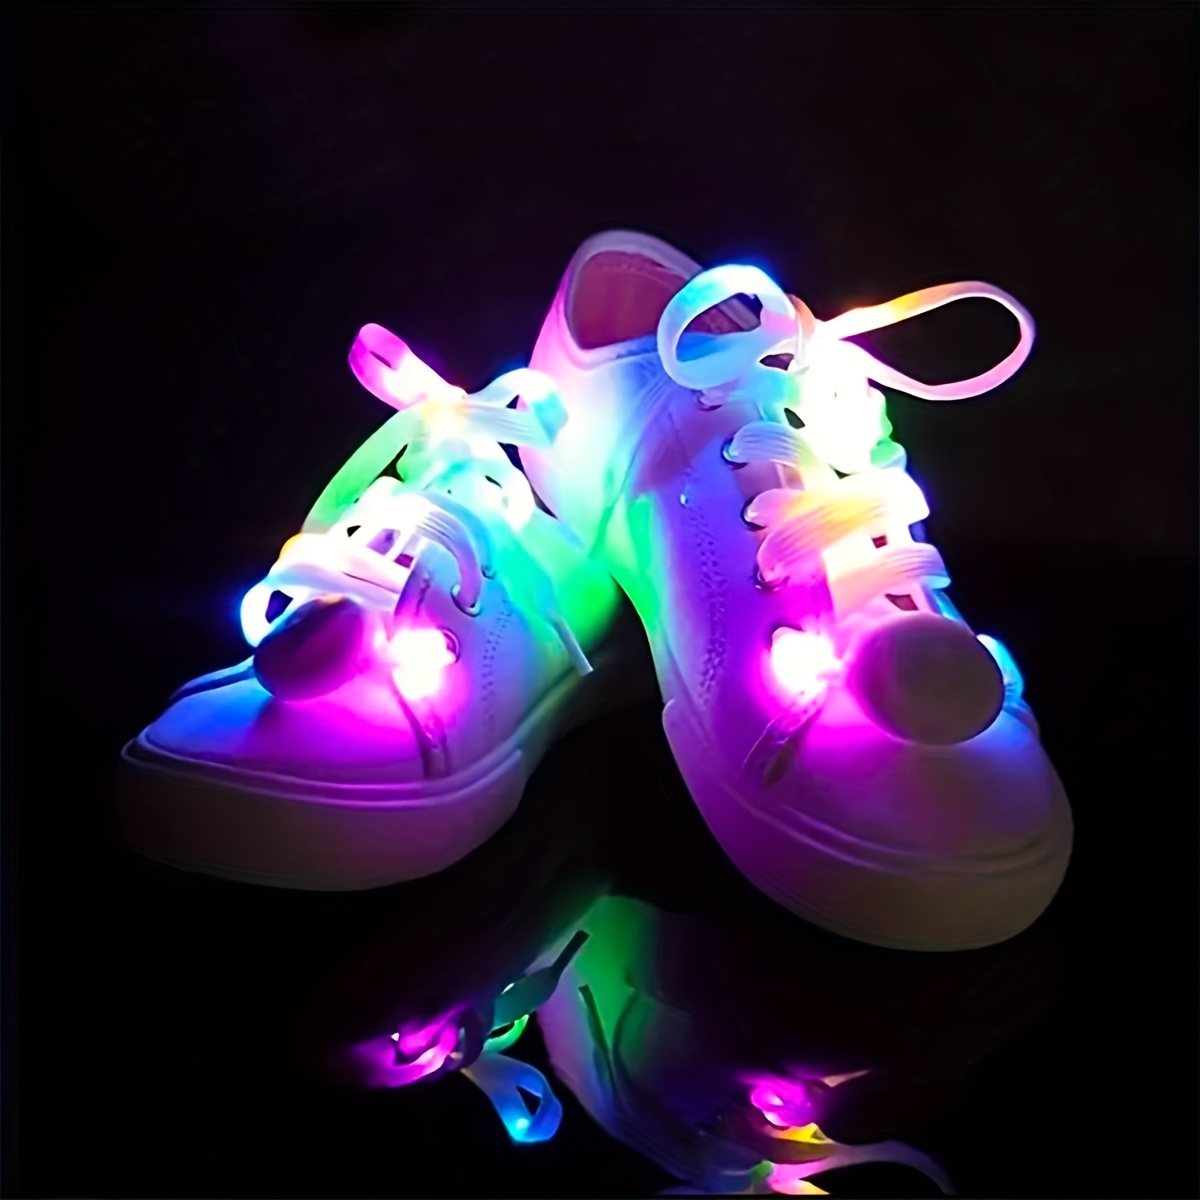 Glow in the Dark Laces 